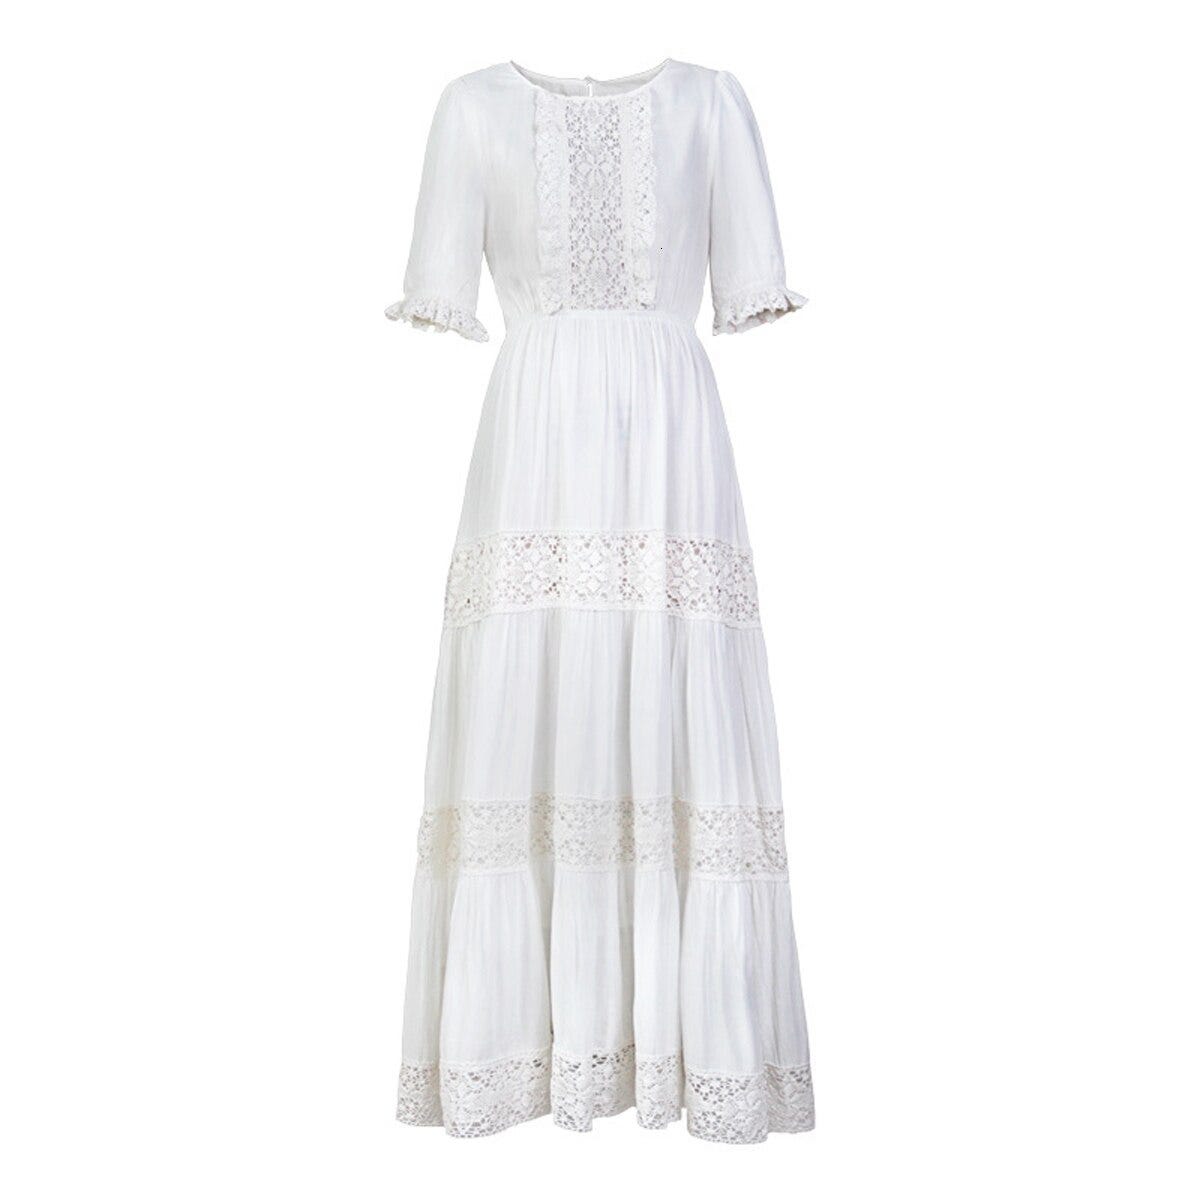 white patchwork lace dress